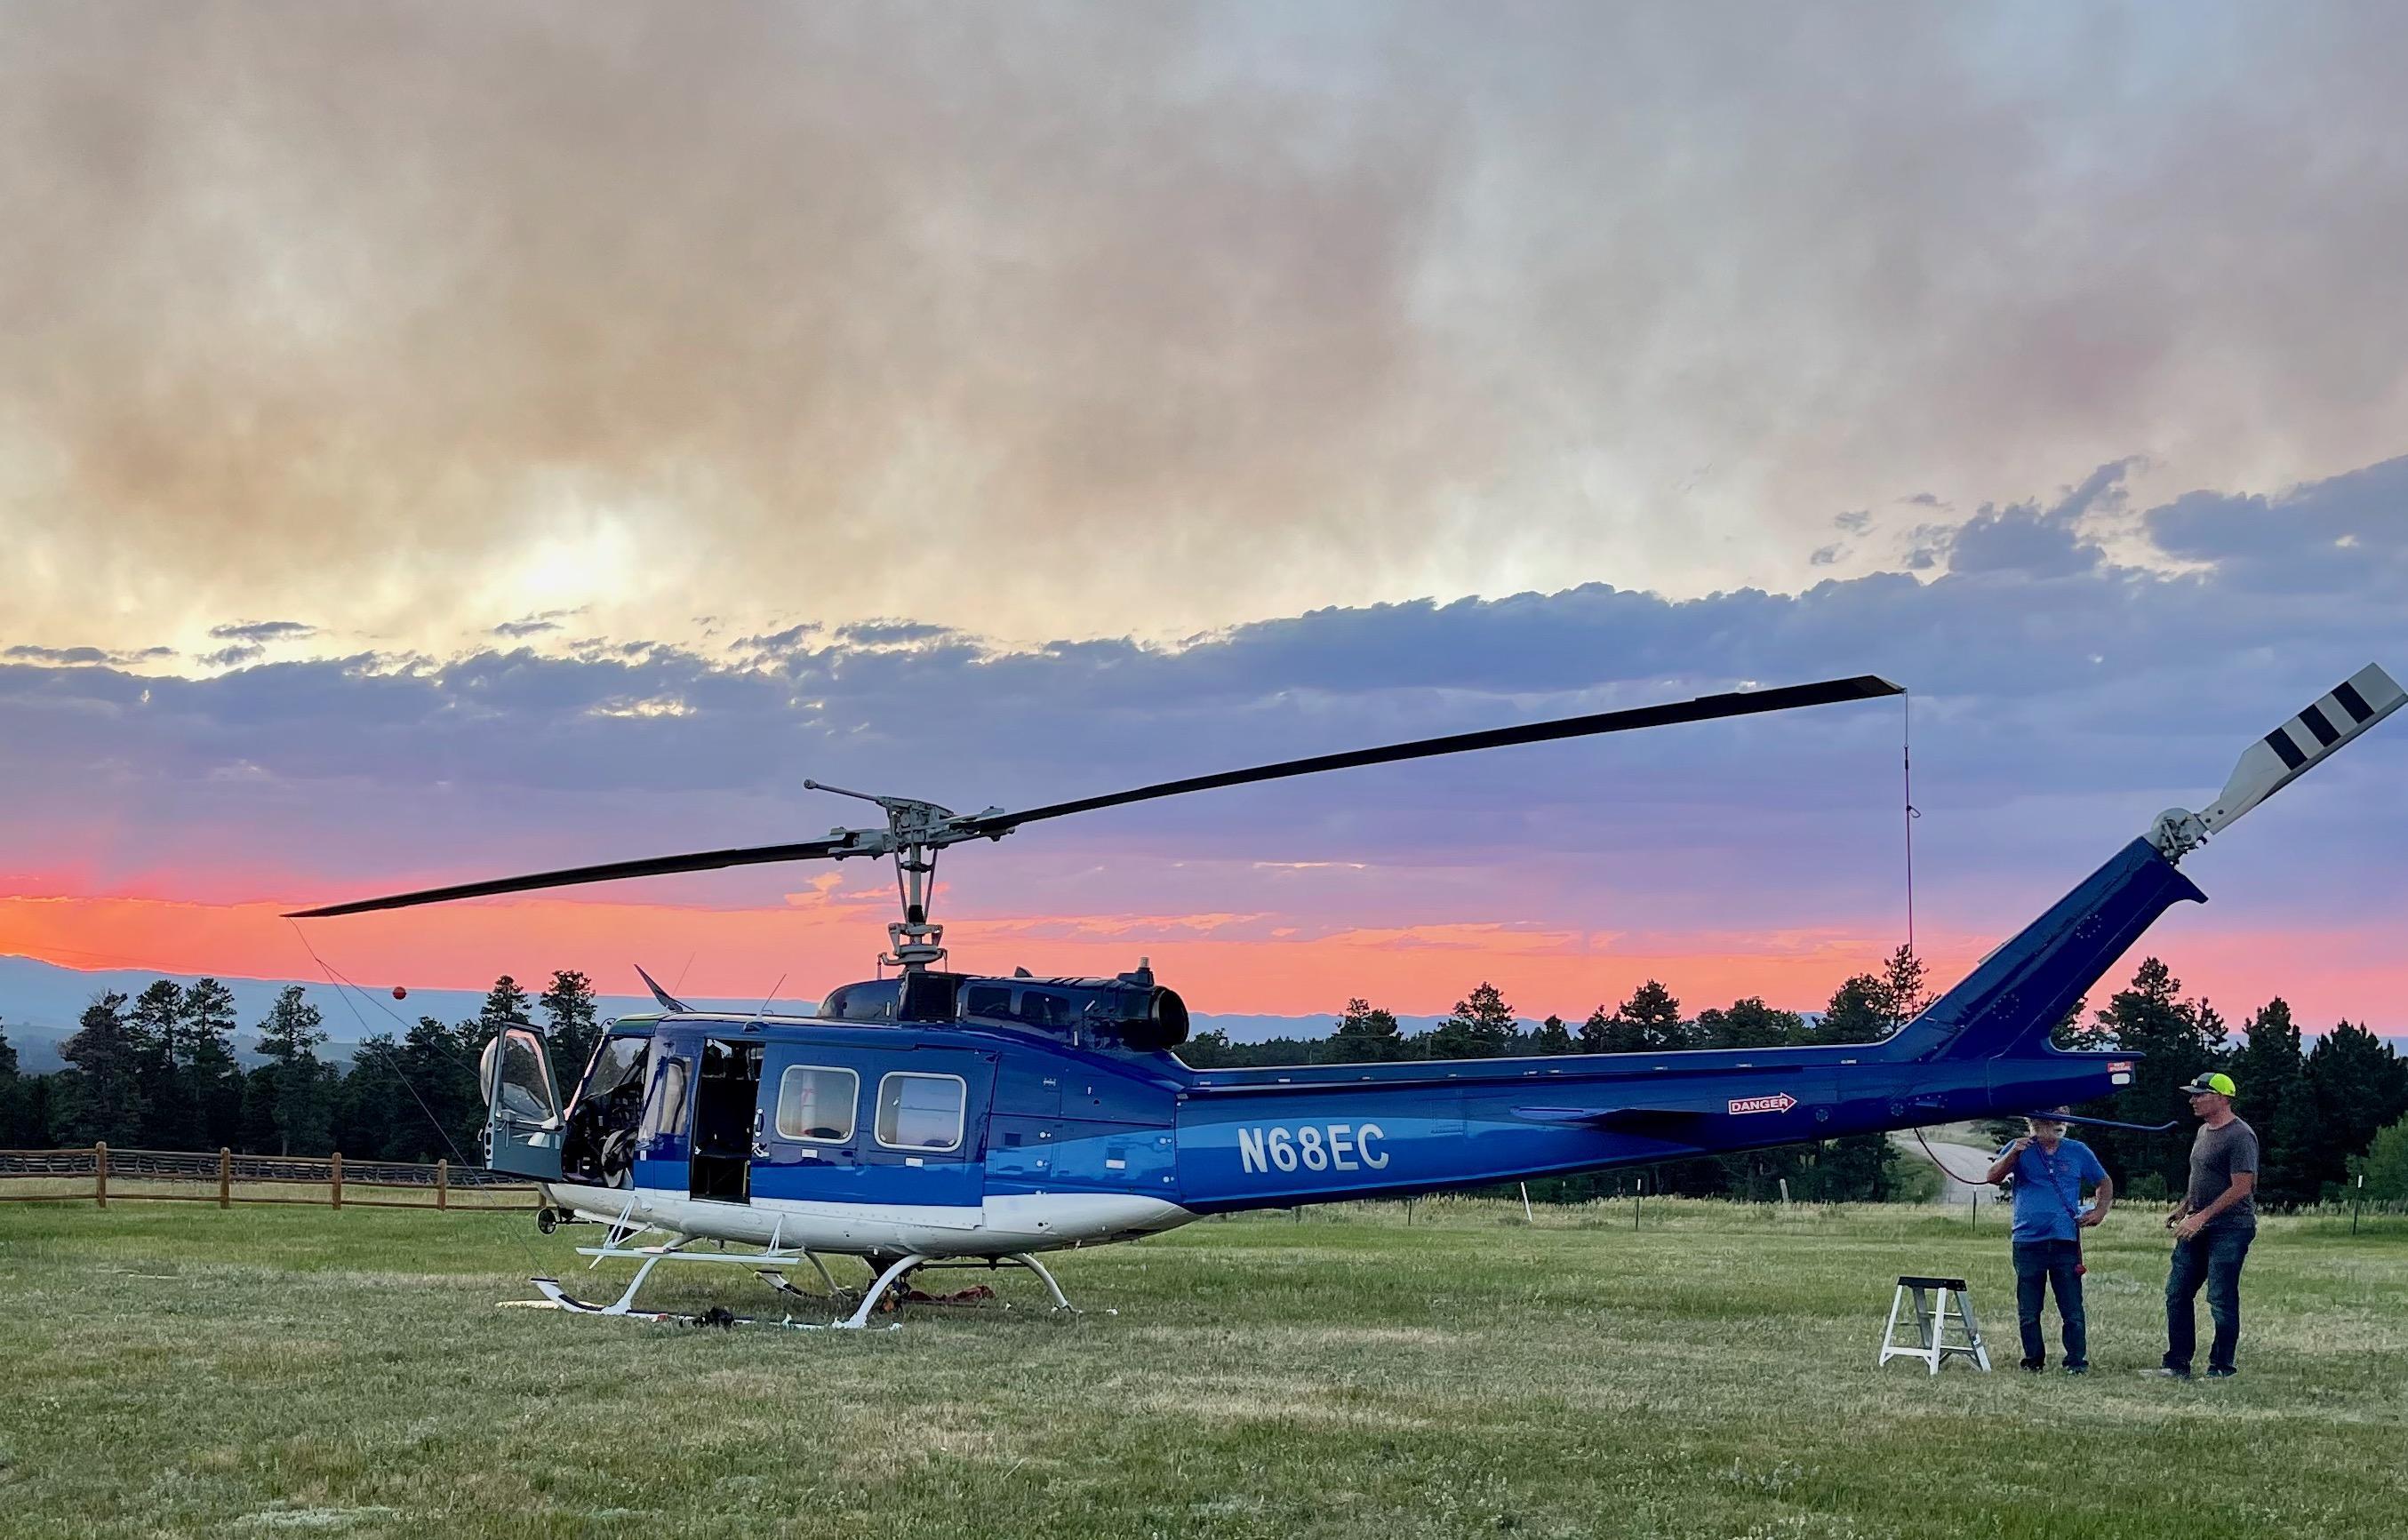 Blue and white Type 2 helicopter sits in the grass in front of a smoky pink and purple sunset